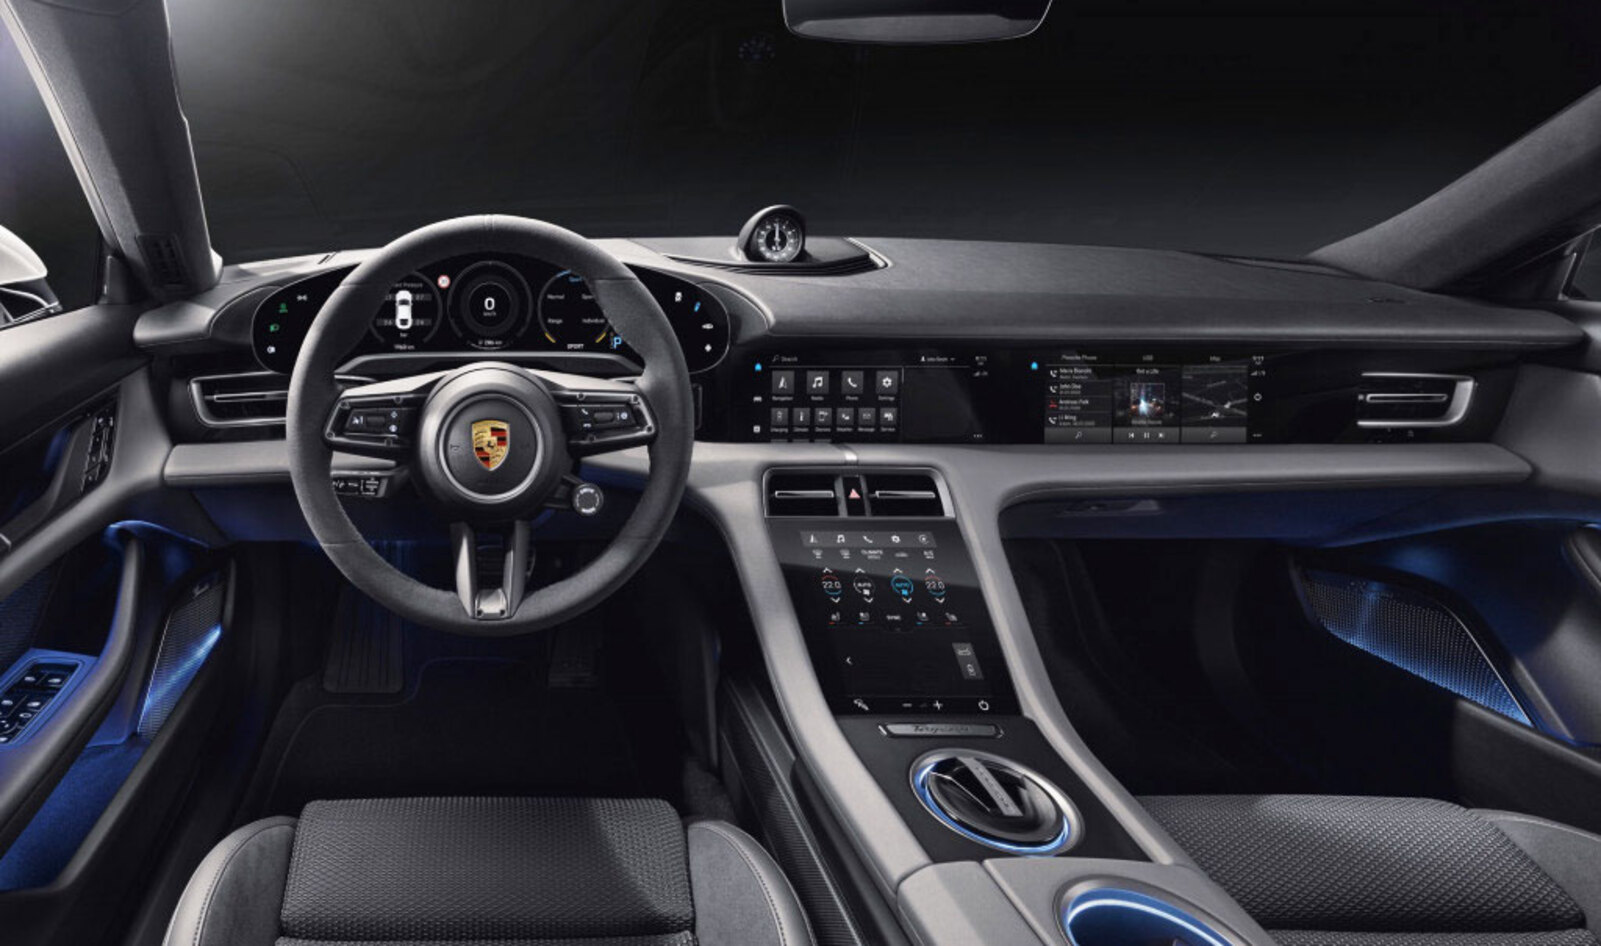 Porsche Aims to Beat Tesla to a Fully Leather-Free Interior | VegNews